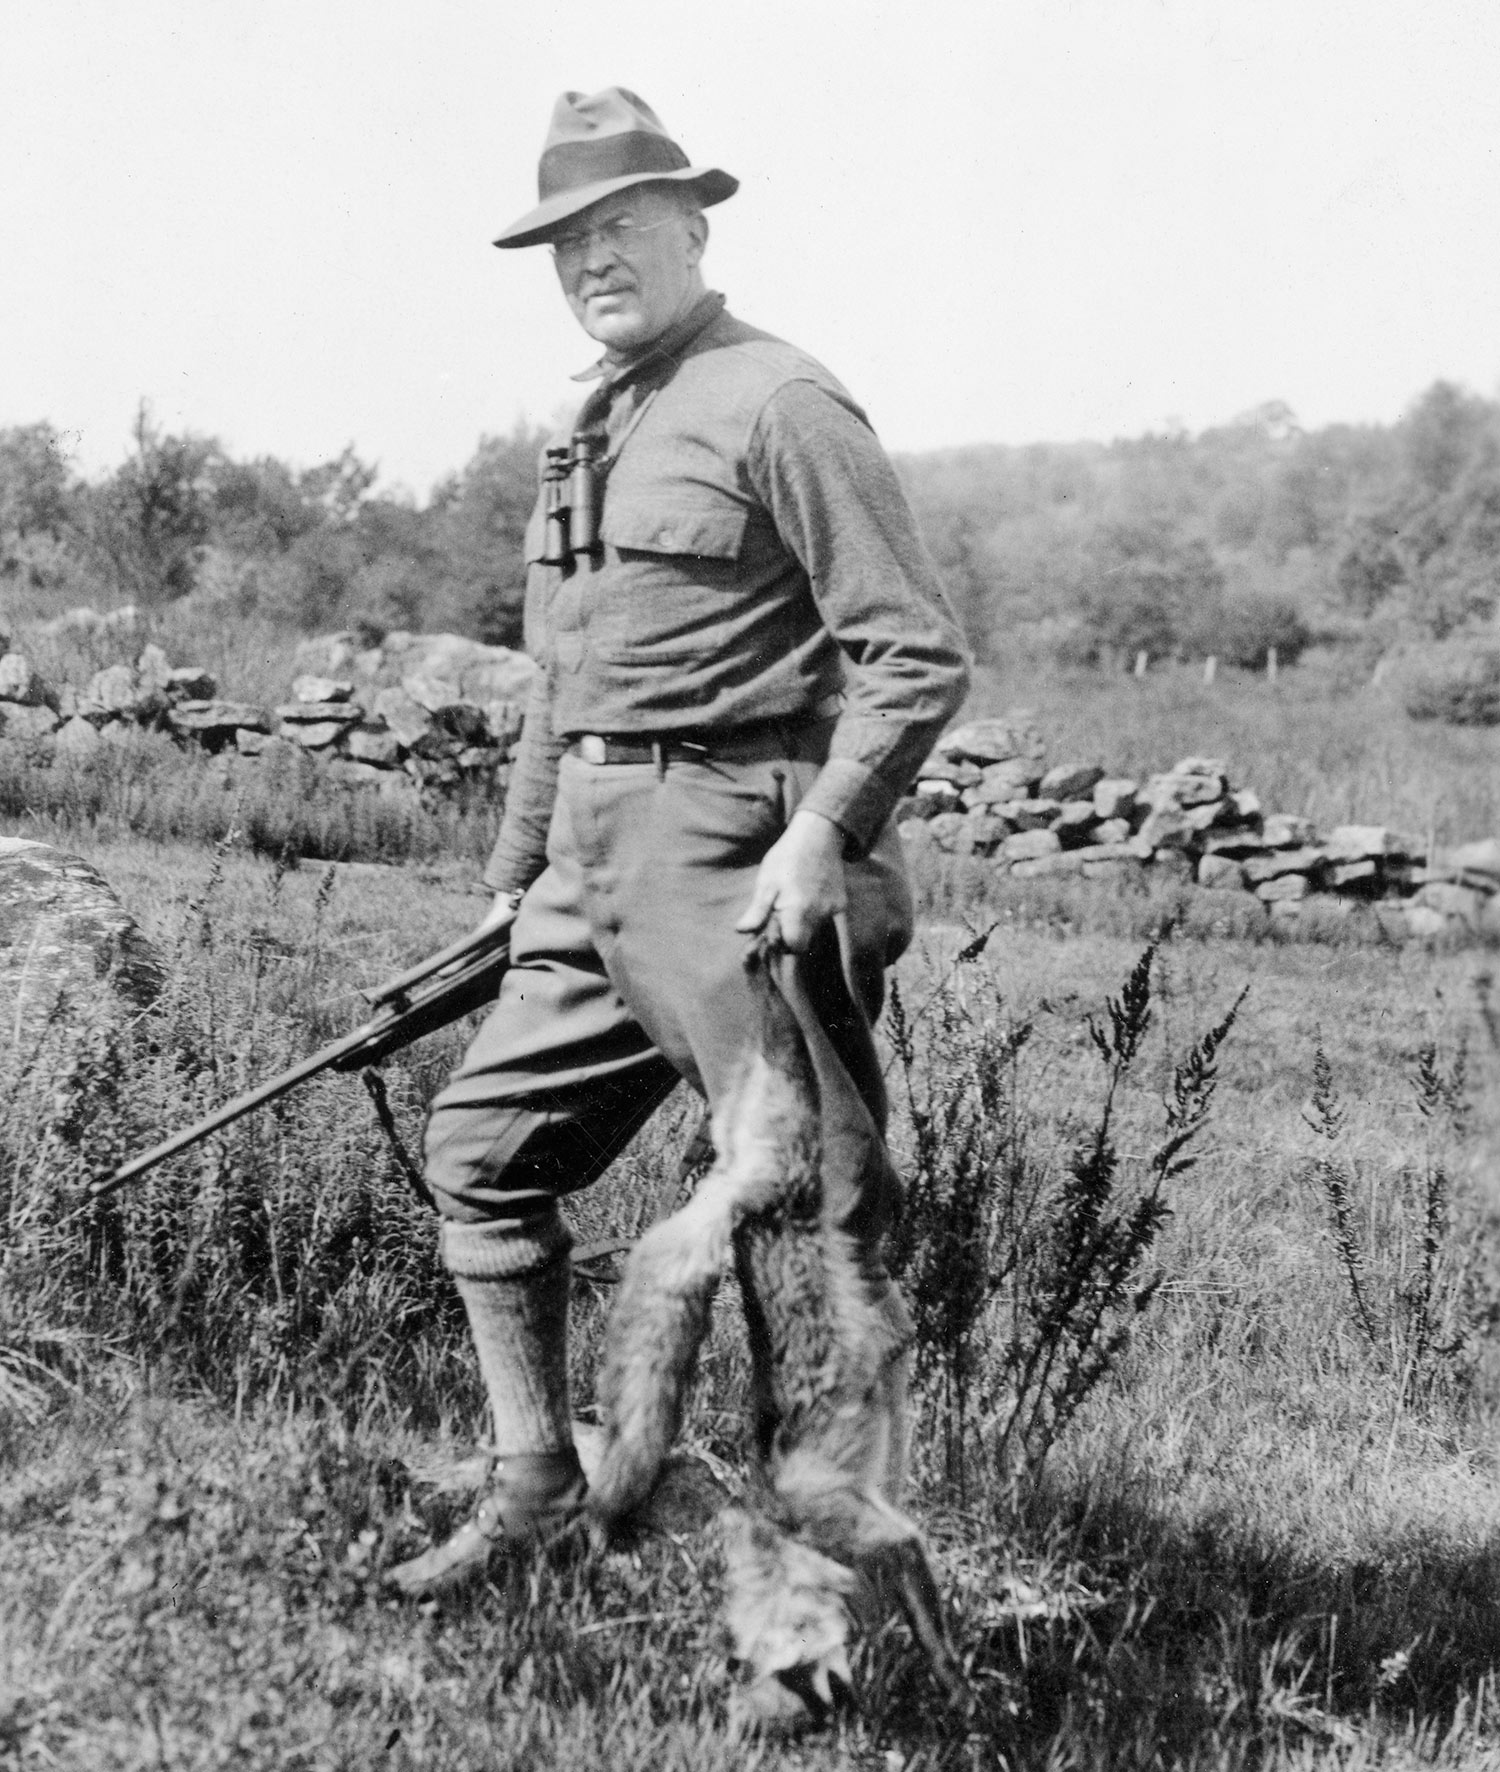 Colonel Townsend Whelen standing in a field in a black and white photo